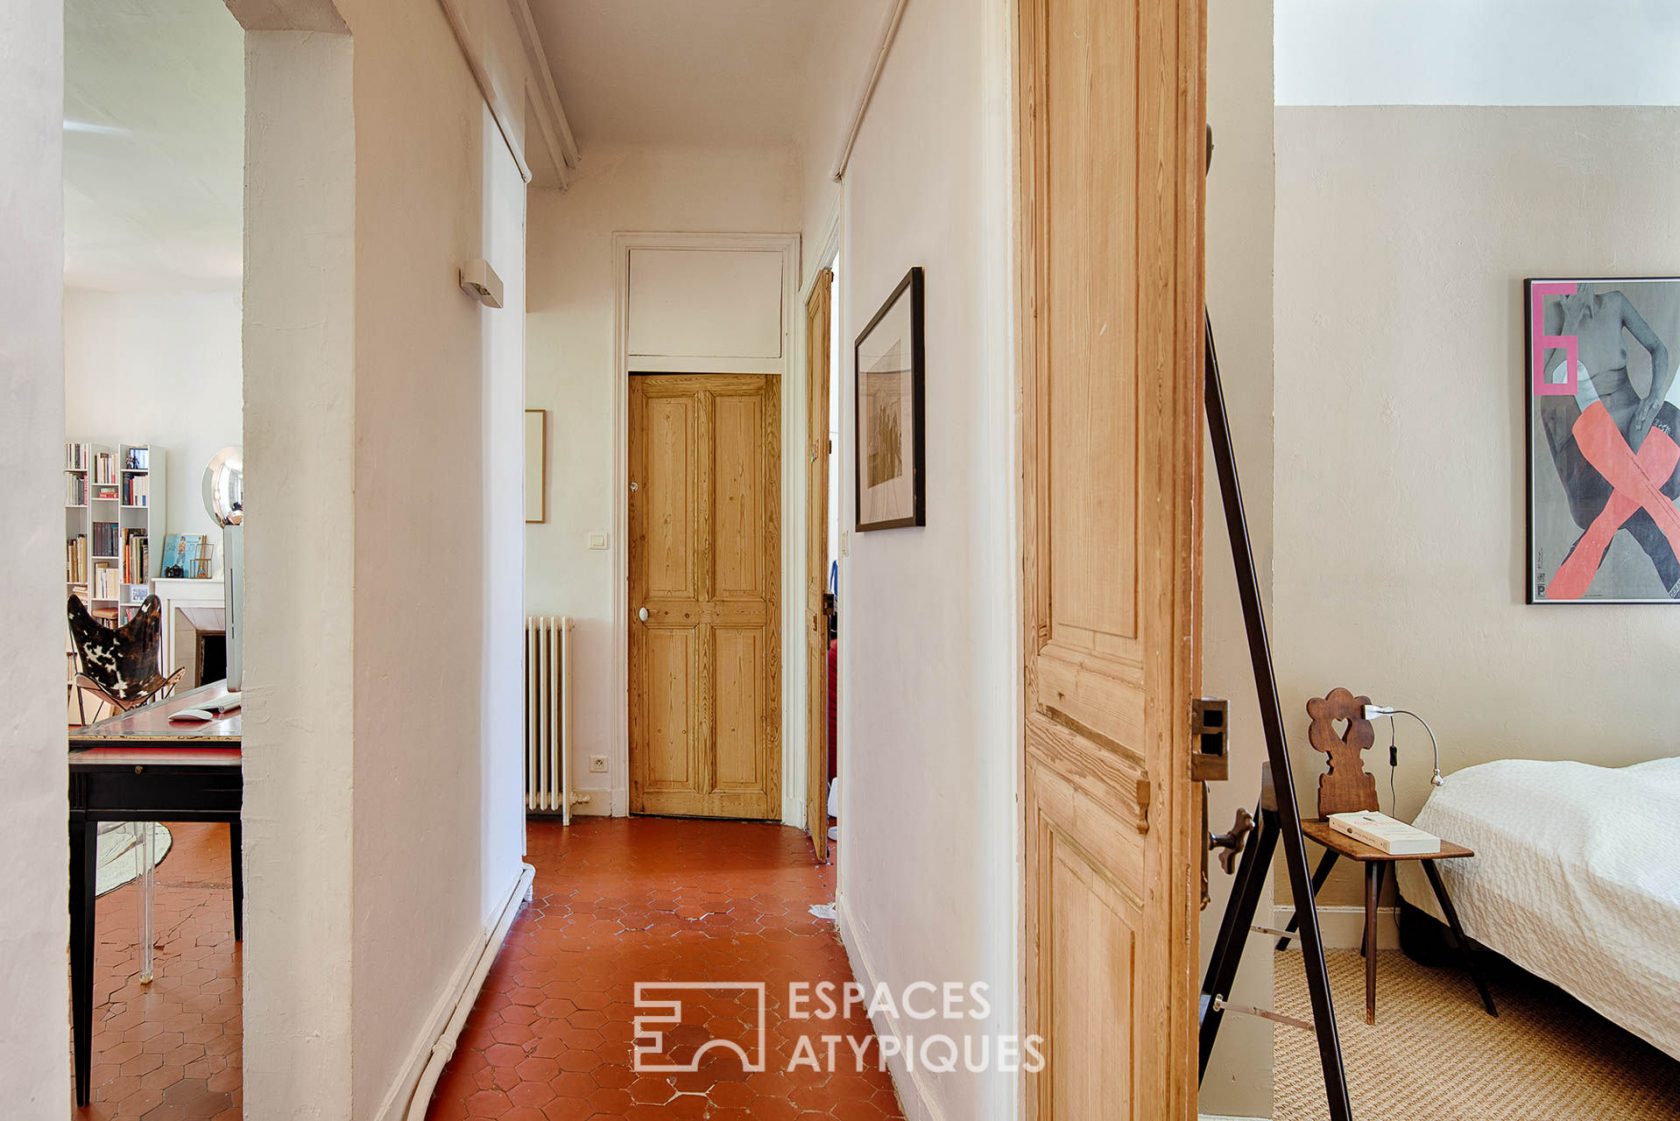 Apartment with bourgeois charm in intra muros